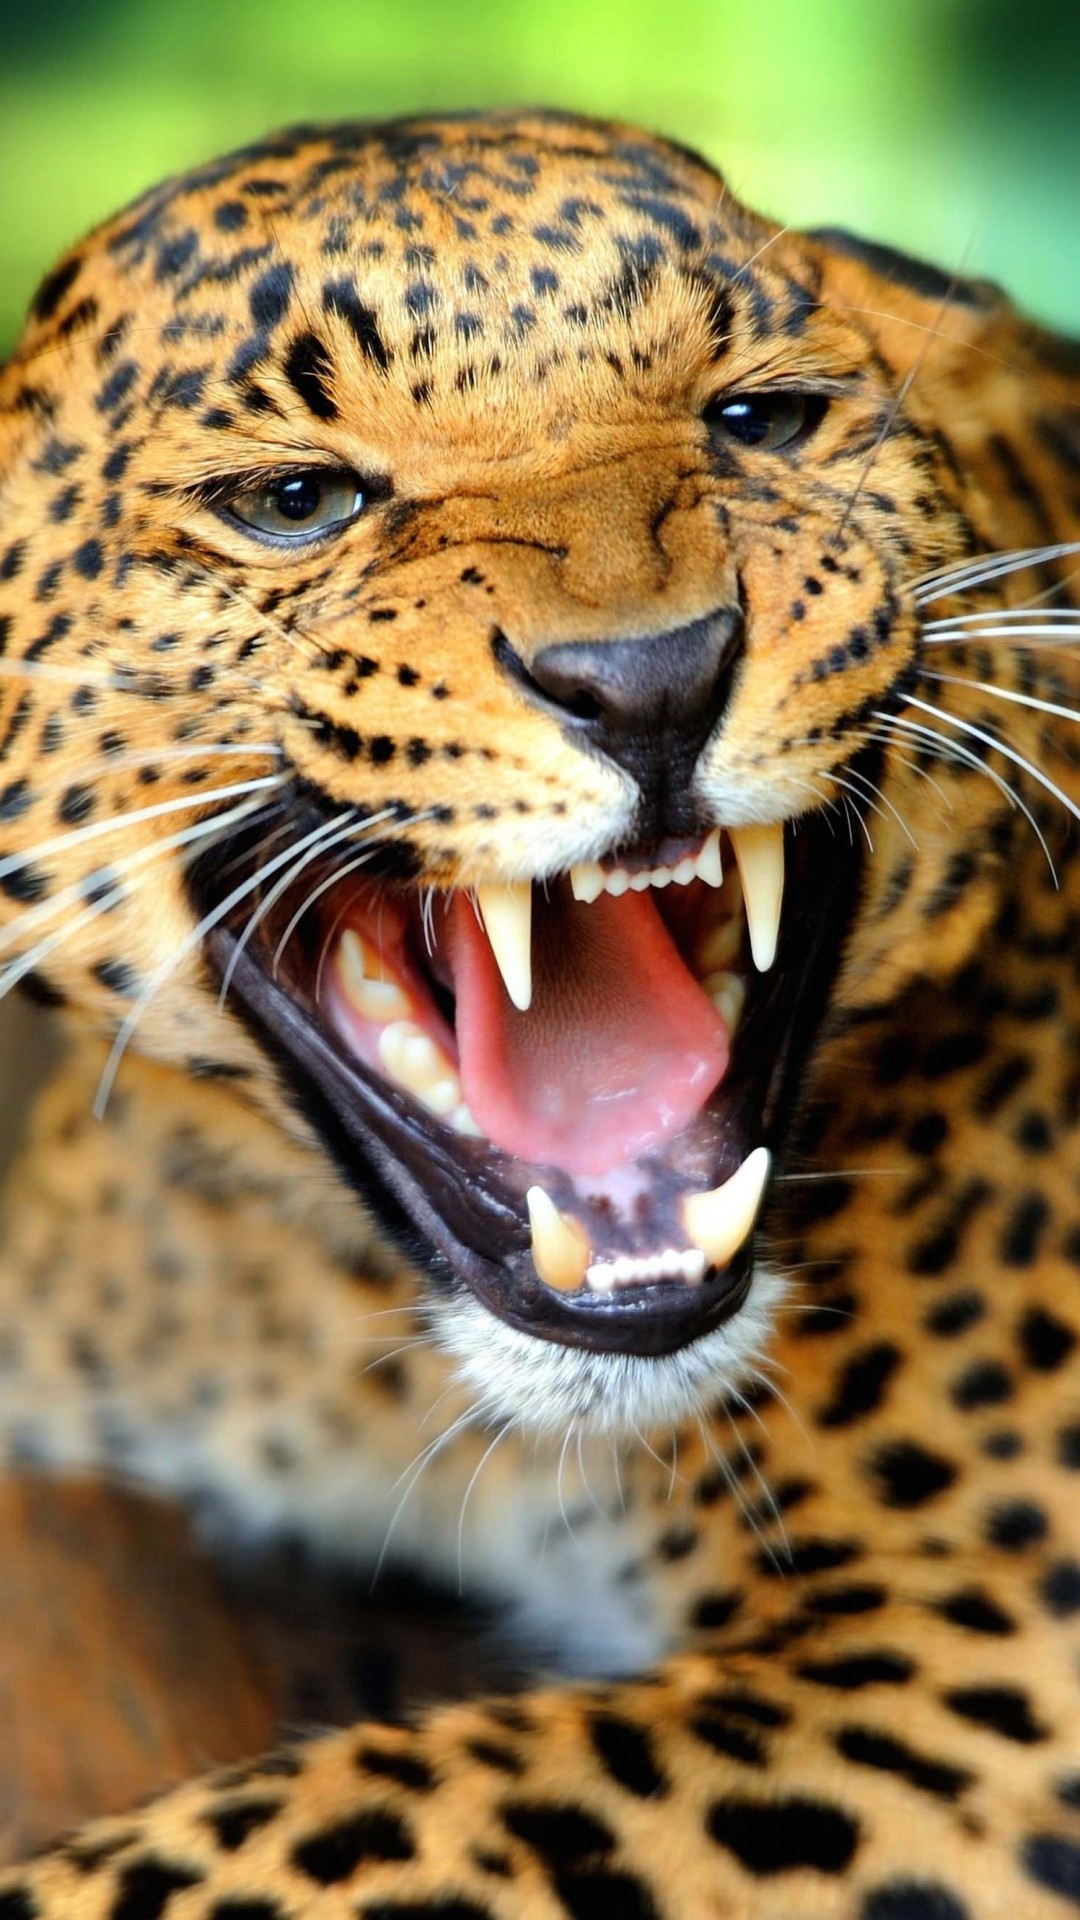 Growling Leopard Wallpaper for HTC One